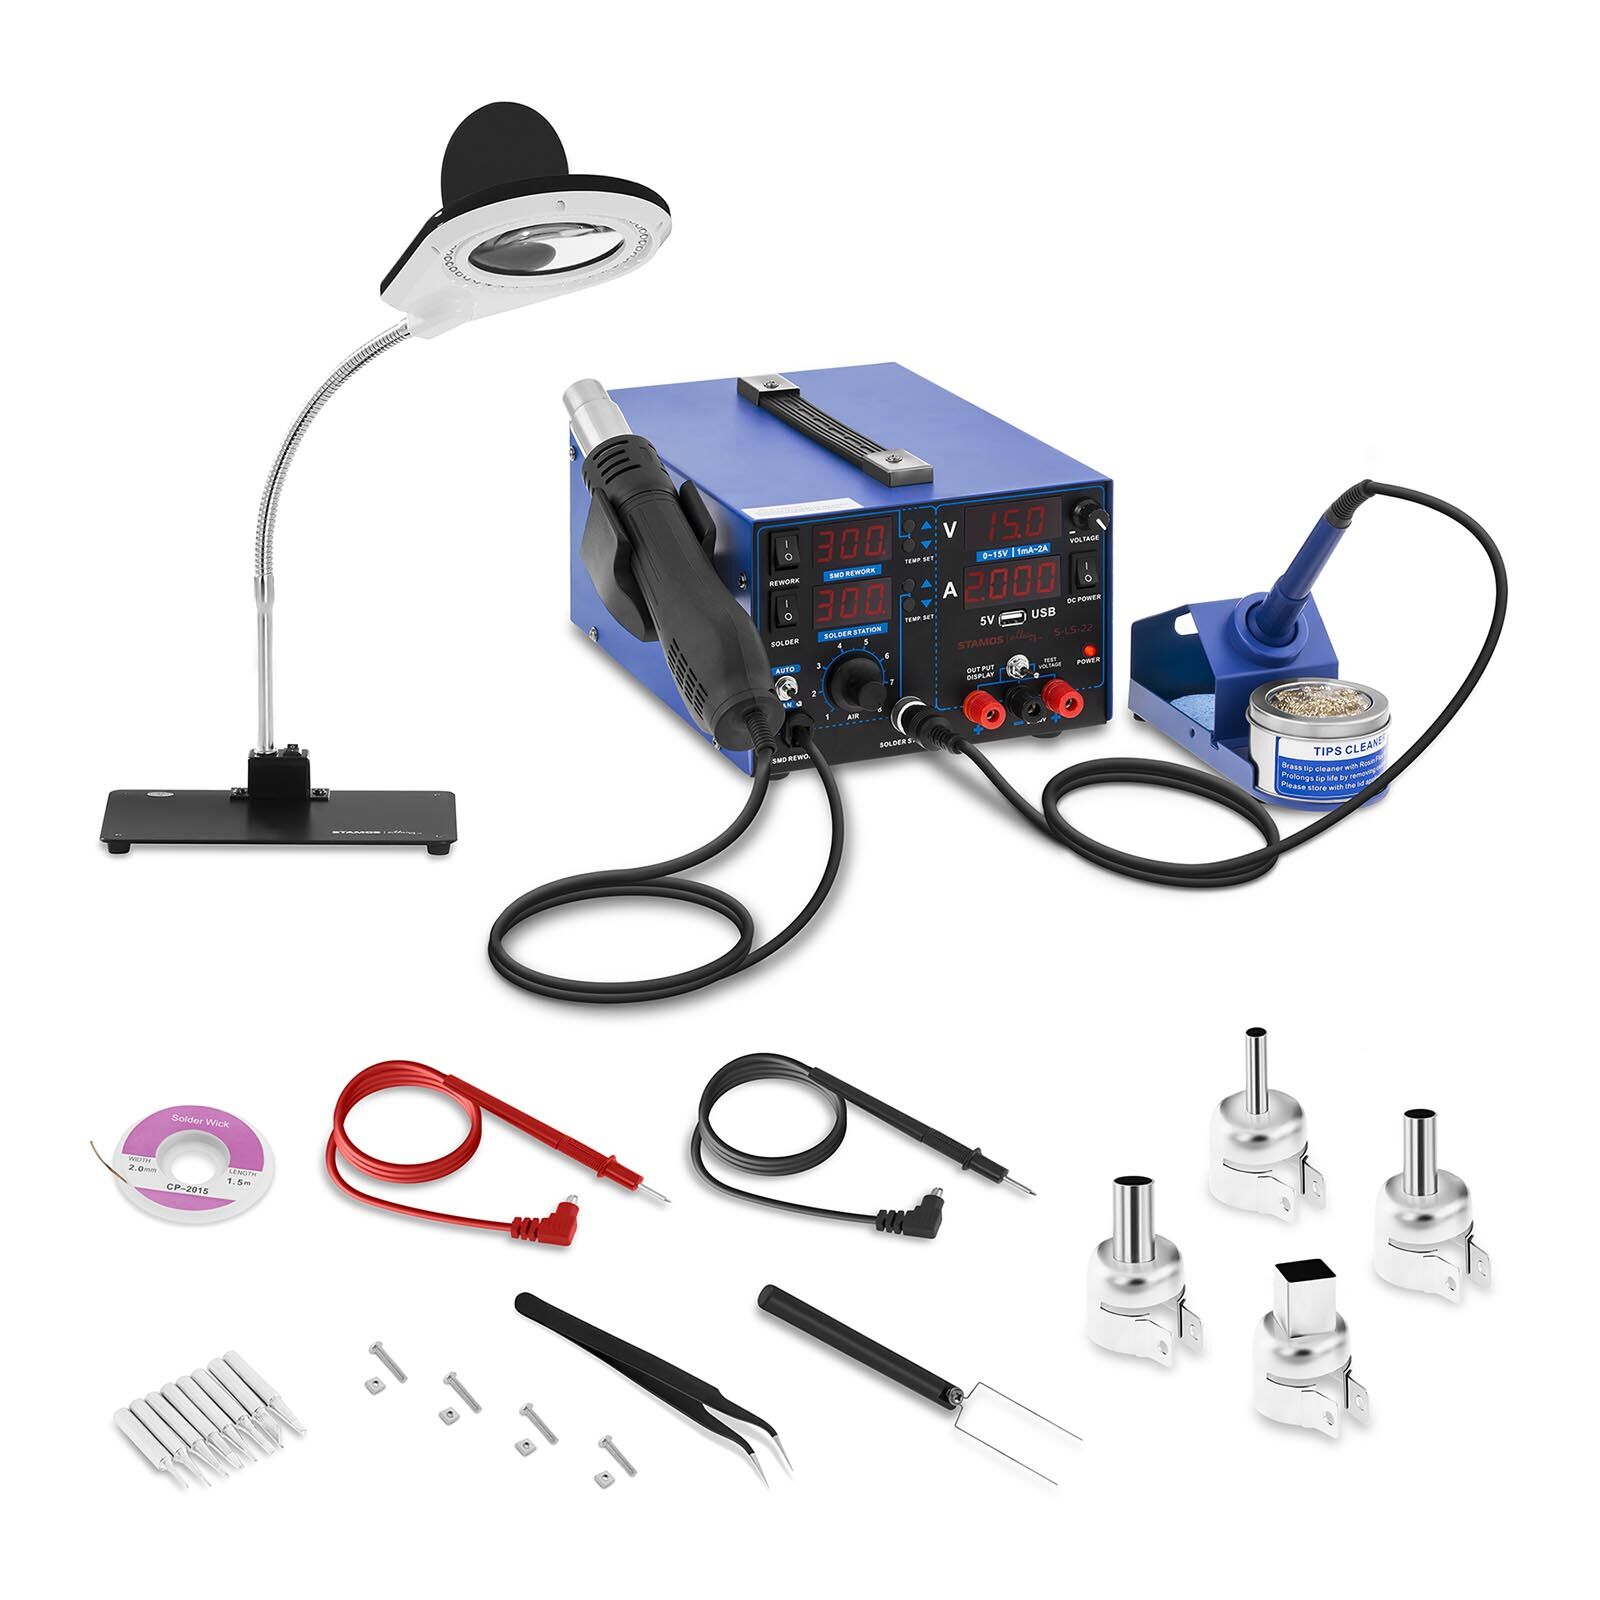 Stamos Soldering Soldering Station - 800 W - 4 LED - with Lamp